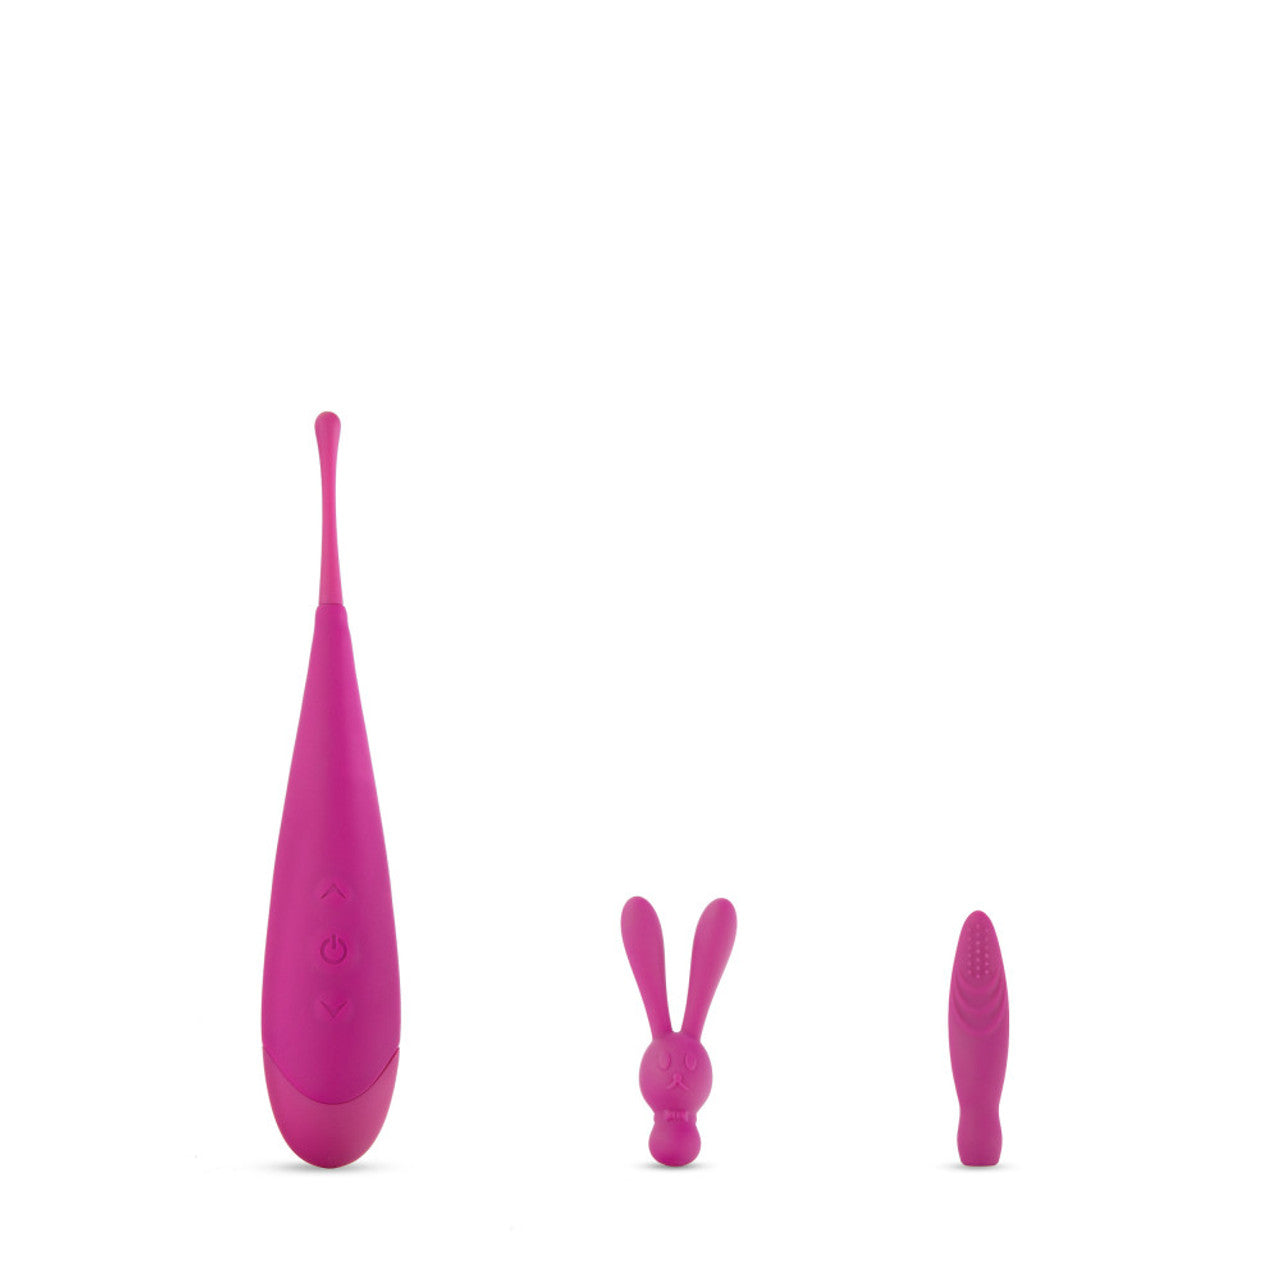 Noje Quiver Oscilating External Vibrator - Lily - Thorn & Feather Sex Toy Canada